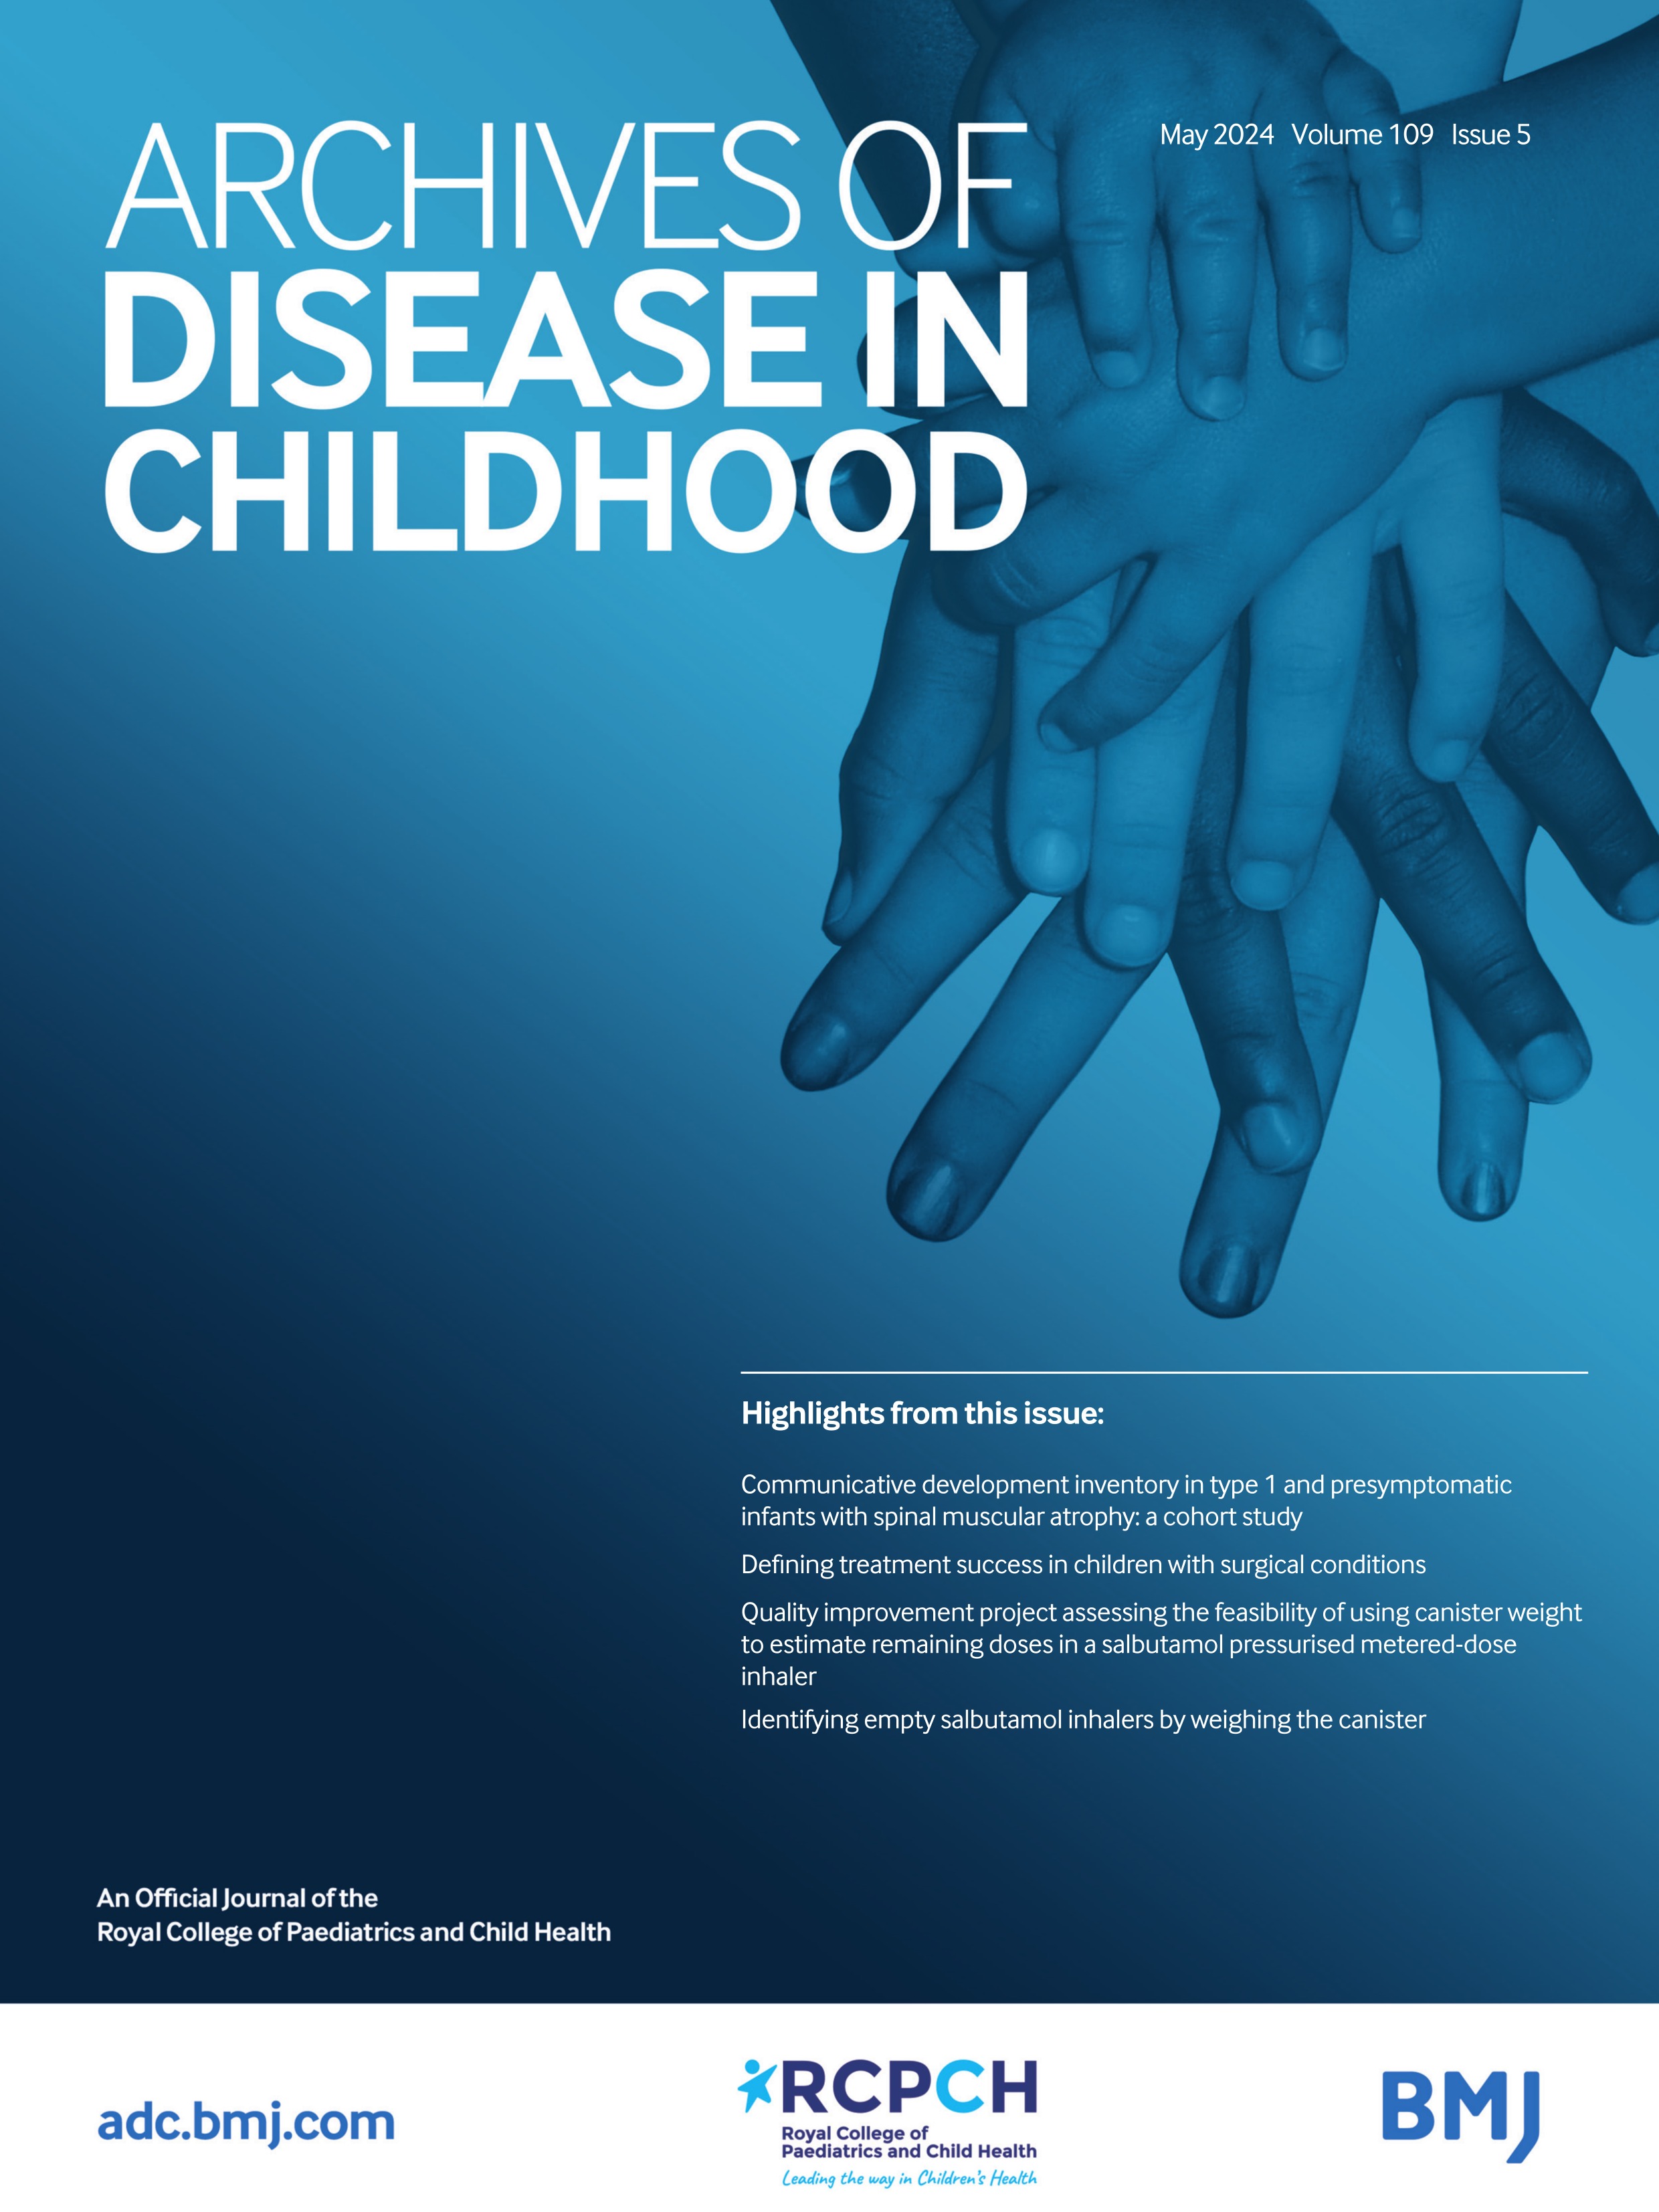 Defining treatment success in children with surgical conditions